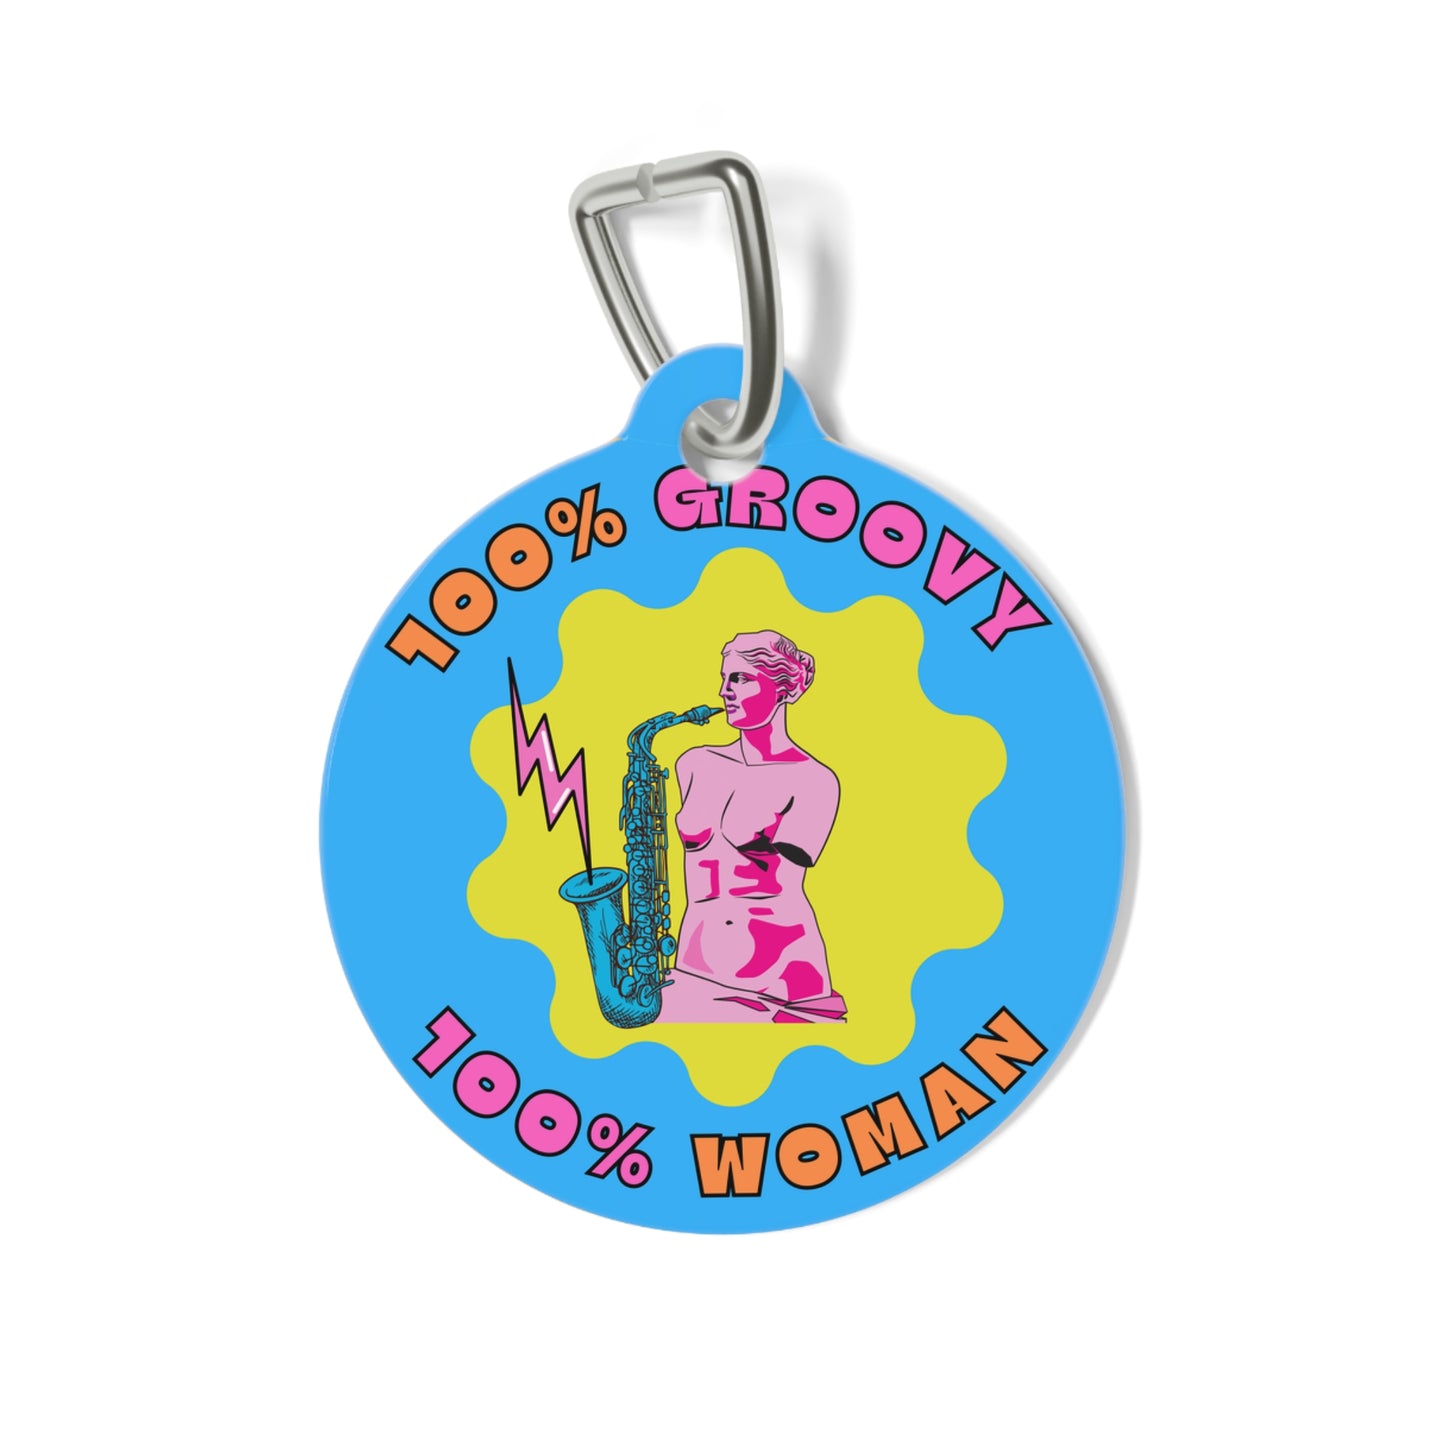 100% Groovy, 100% Woman Colorful Keychain